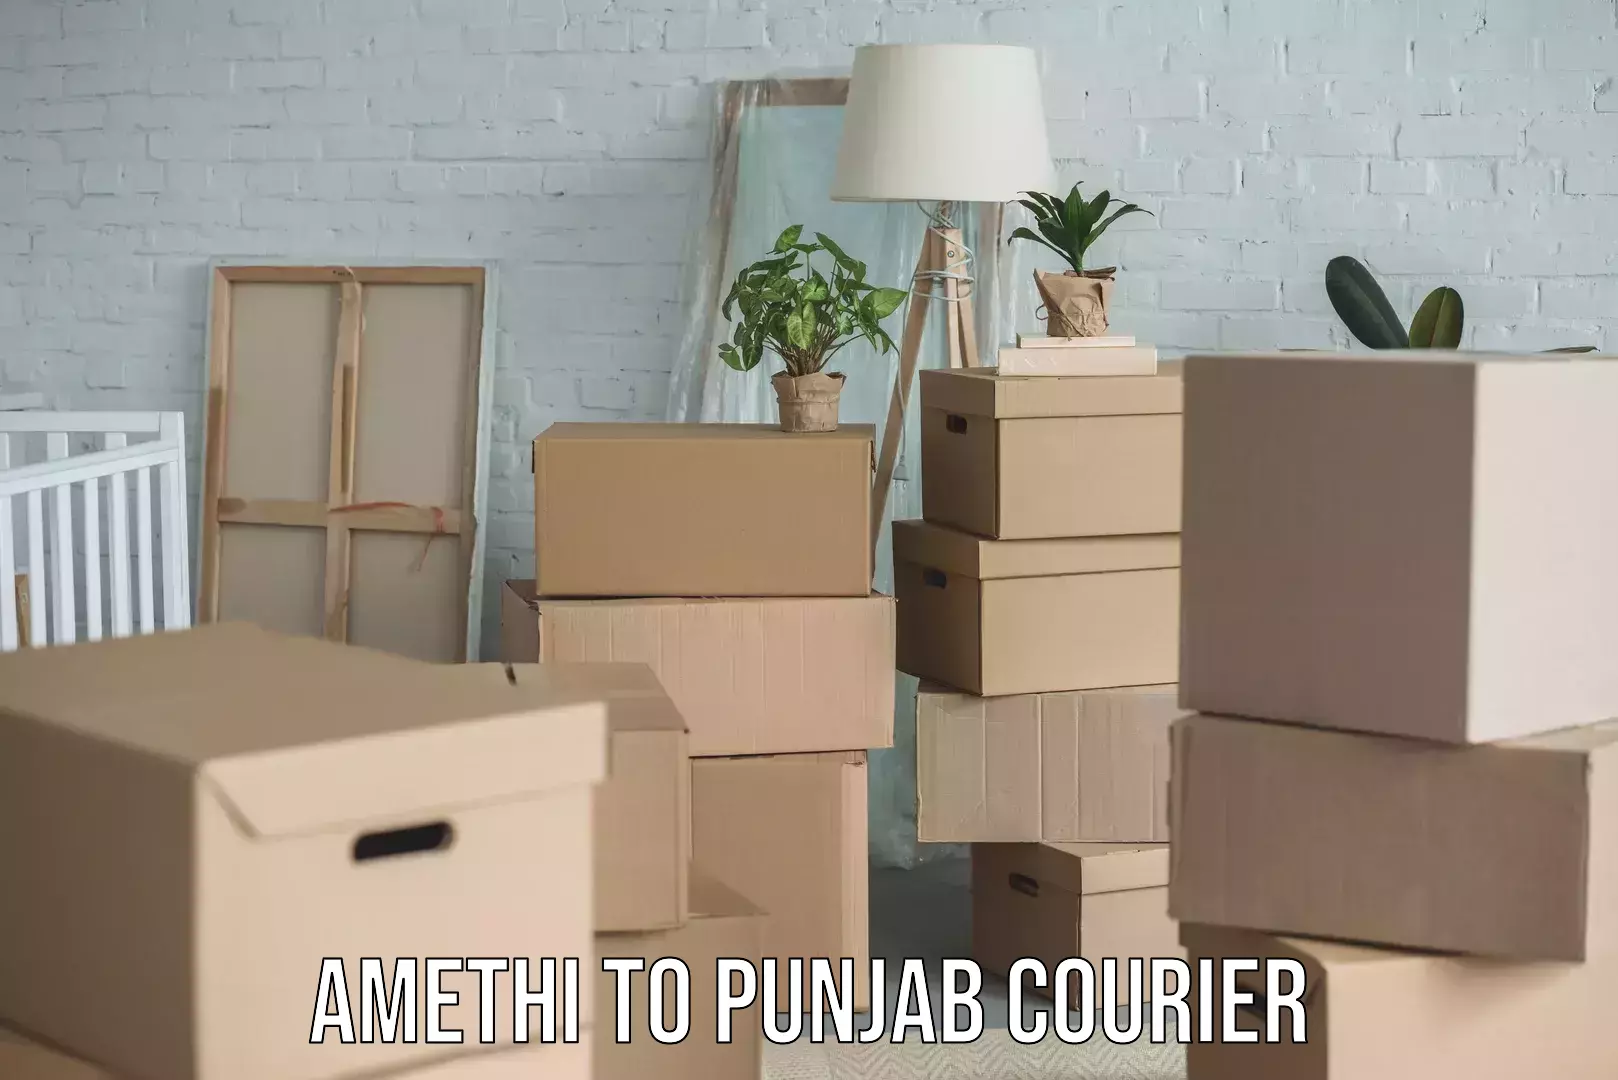 24-hour courier service Amethi to Punjab